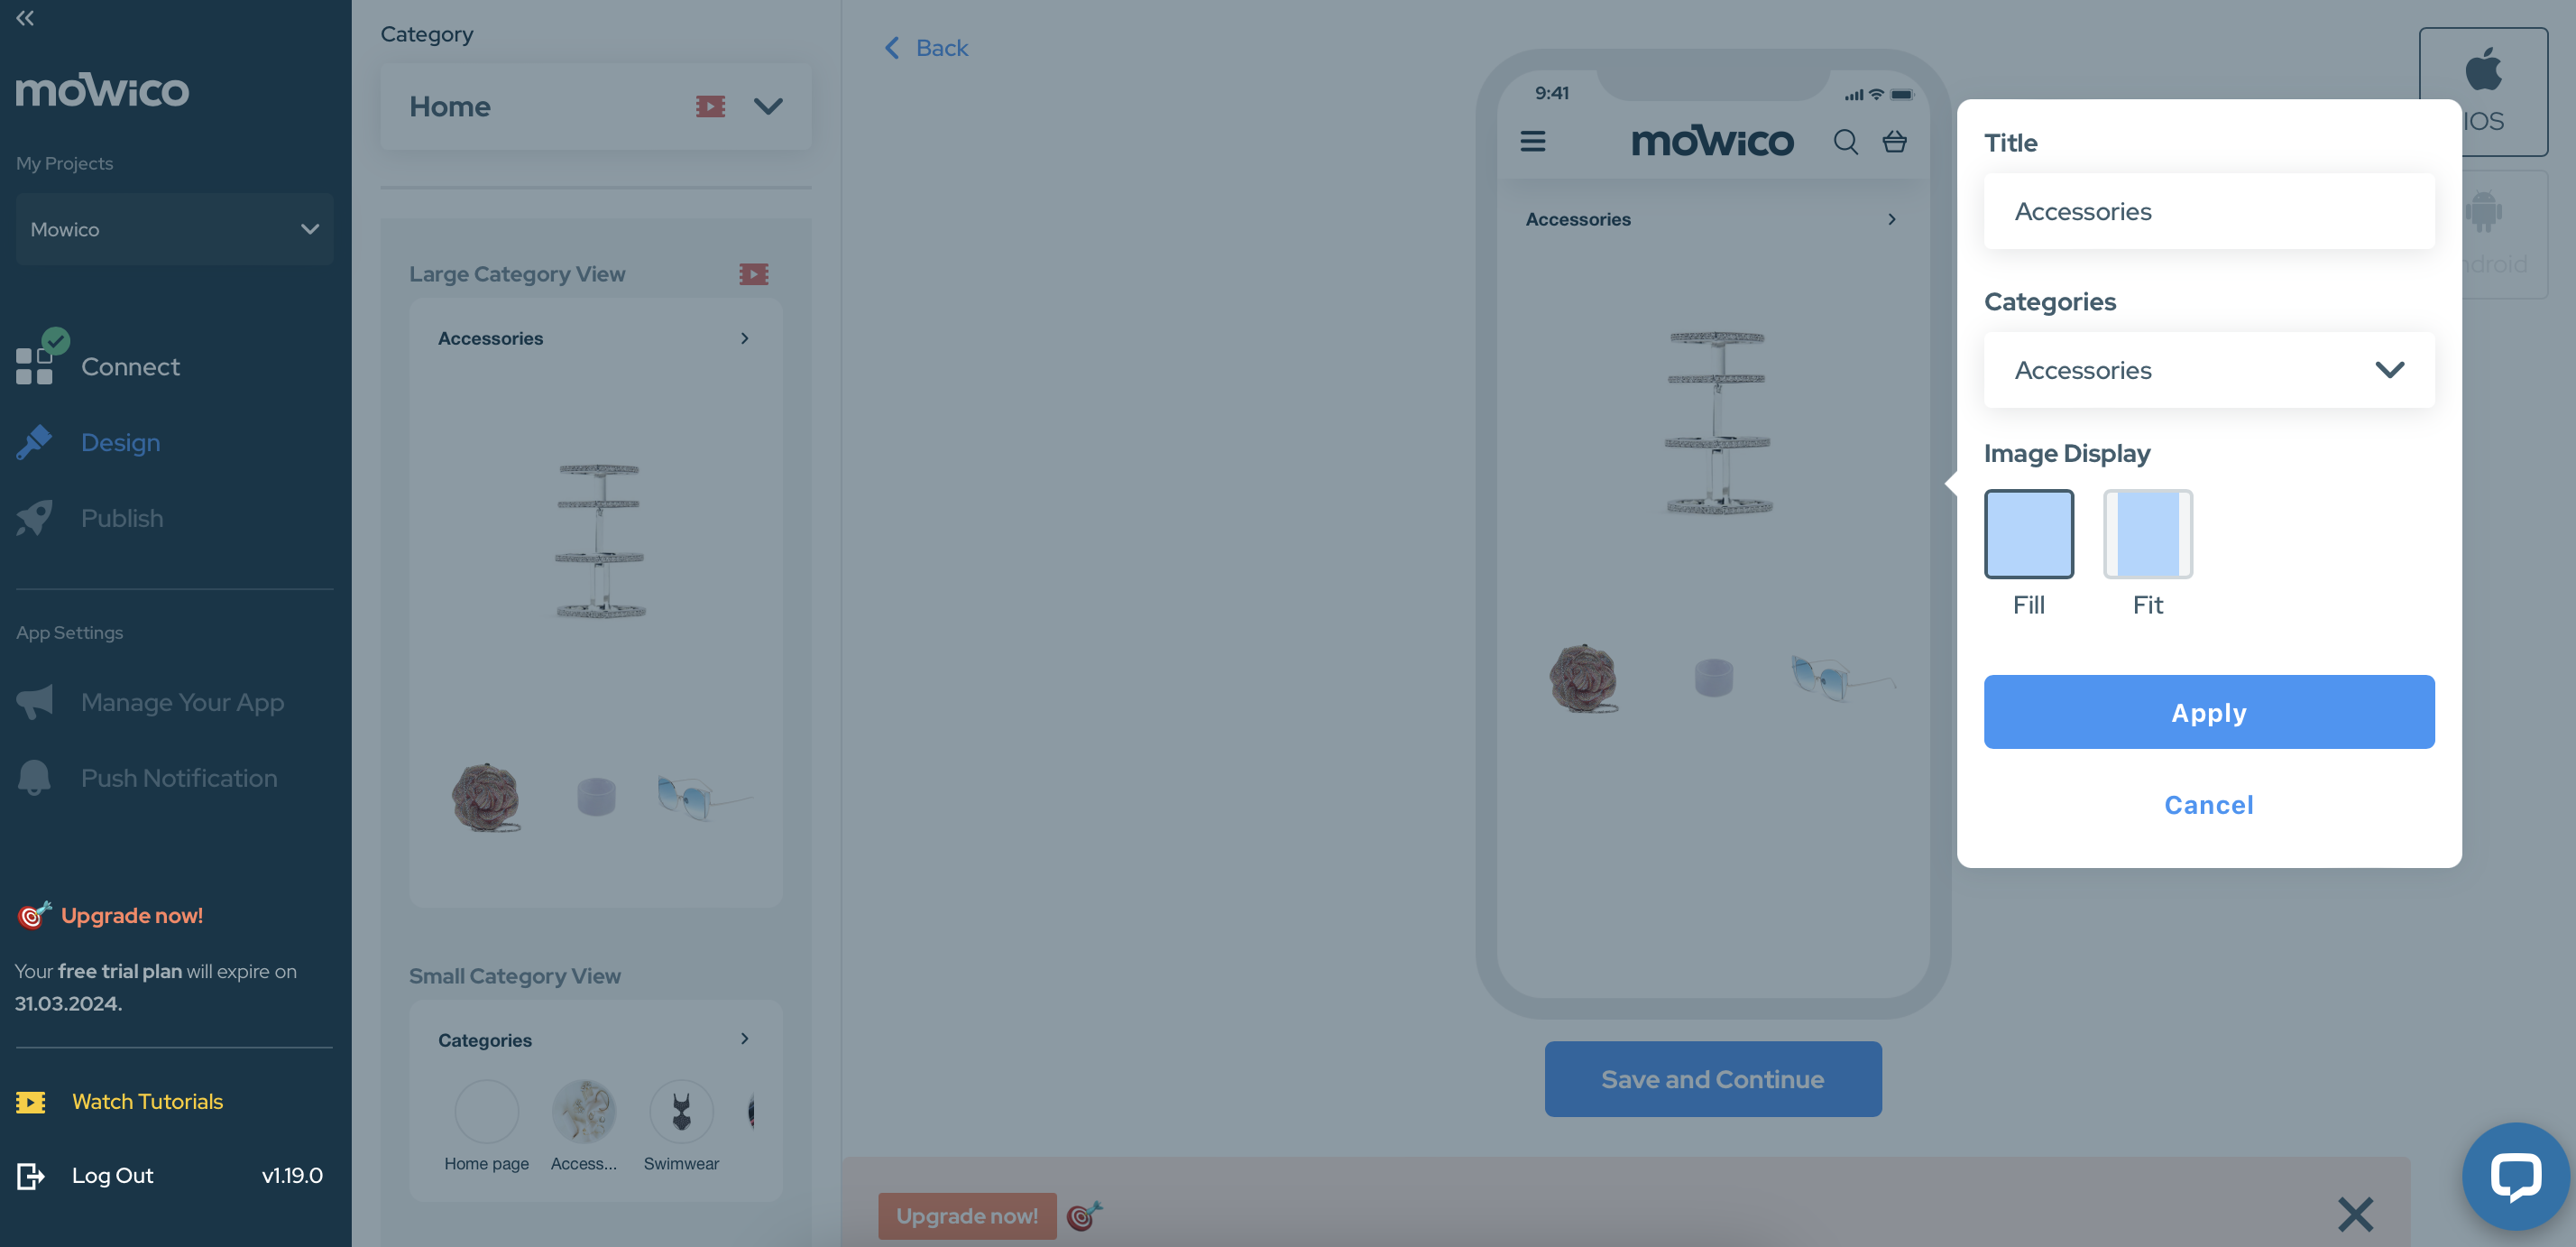 How to add and edit category views in Mowico